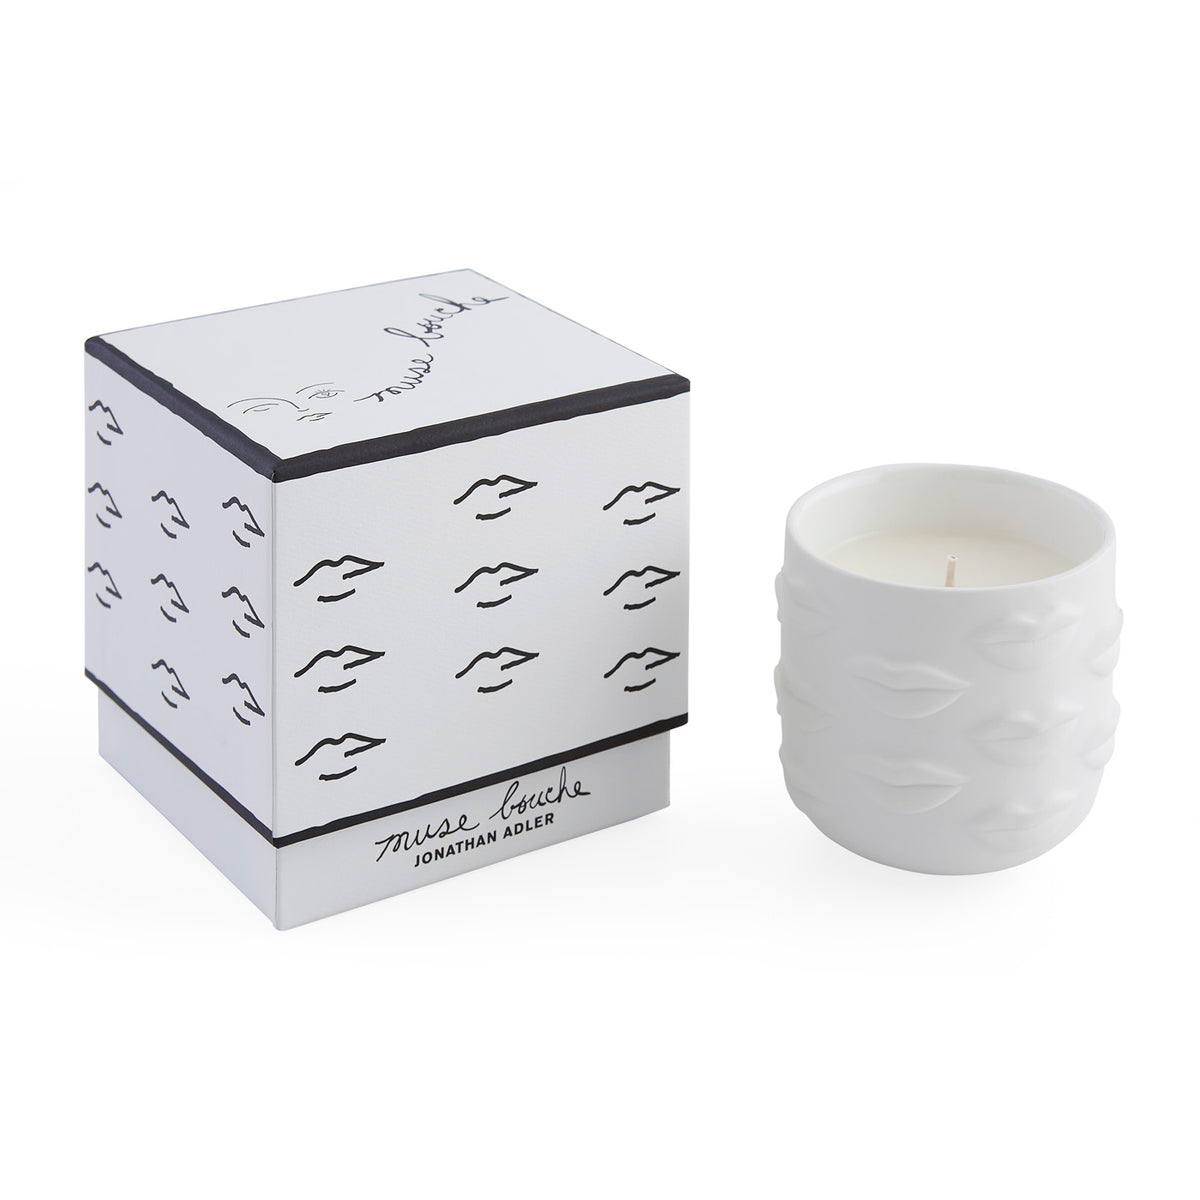 Muse Bouche Candle by Jonathan Adler